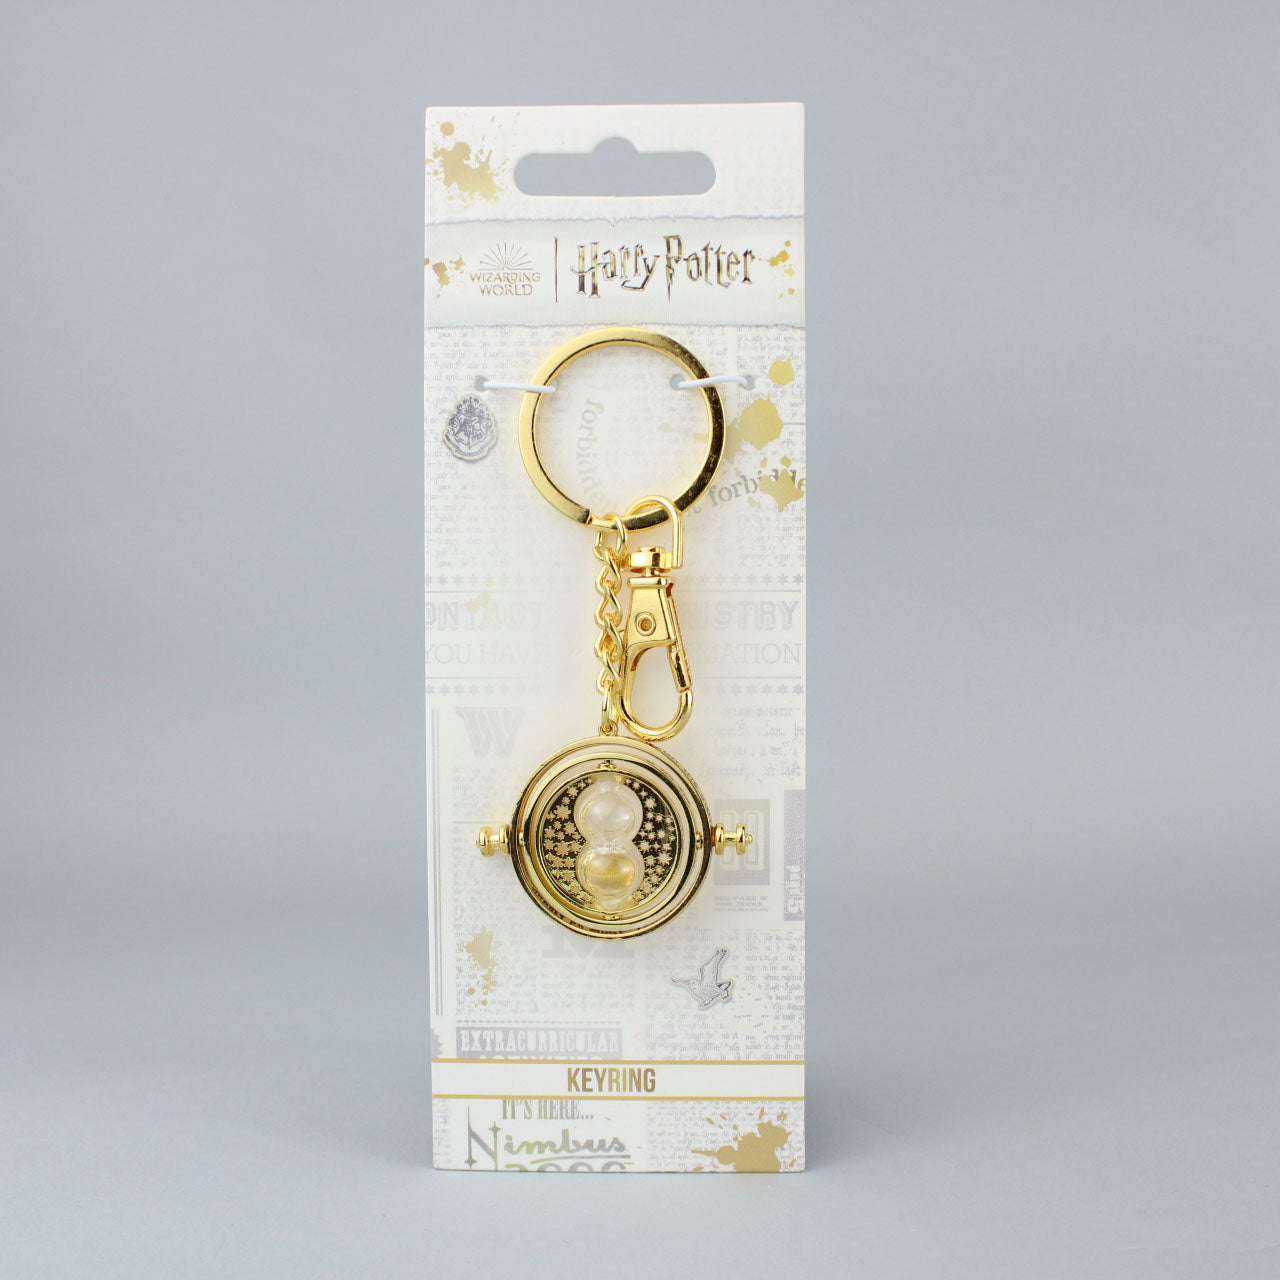 Load image into Gallery viewer, Time Turner (Harry Potter) Keychain
